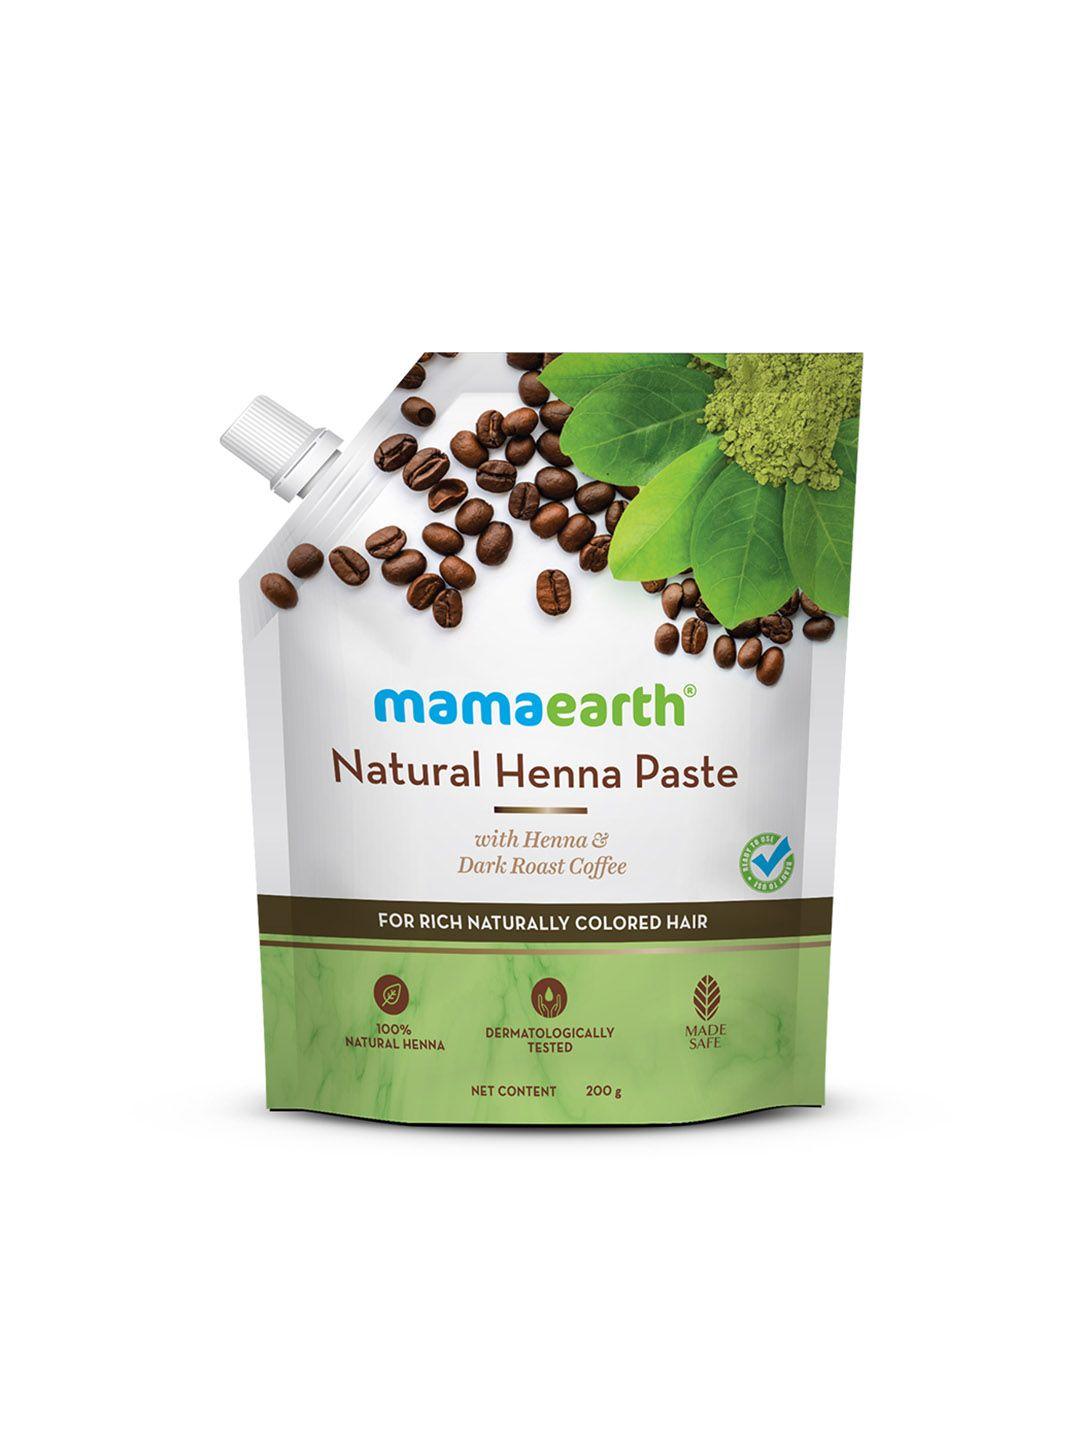 mamaearth natural henna paste with henna & dark roasted coffee - 200 g